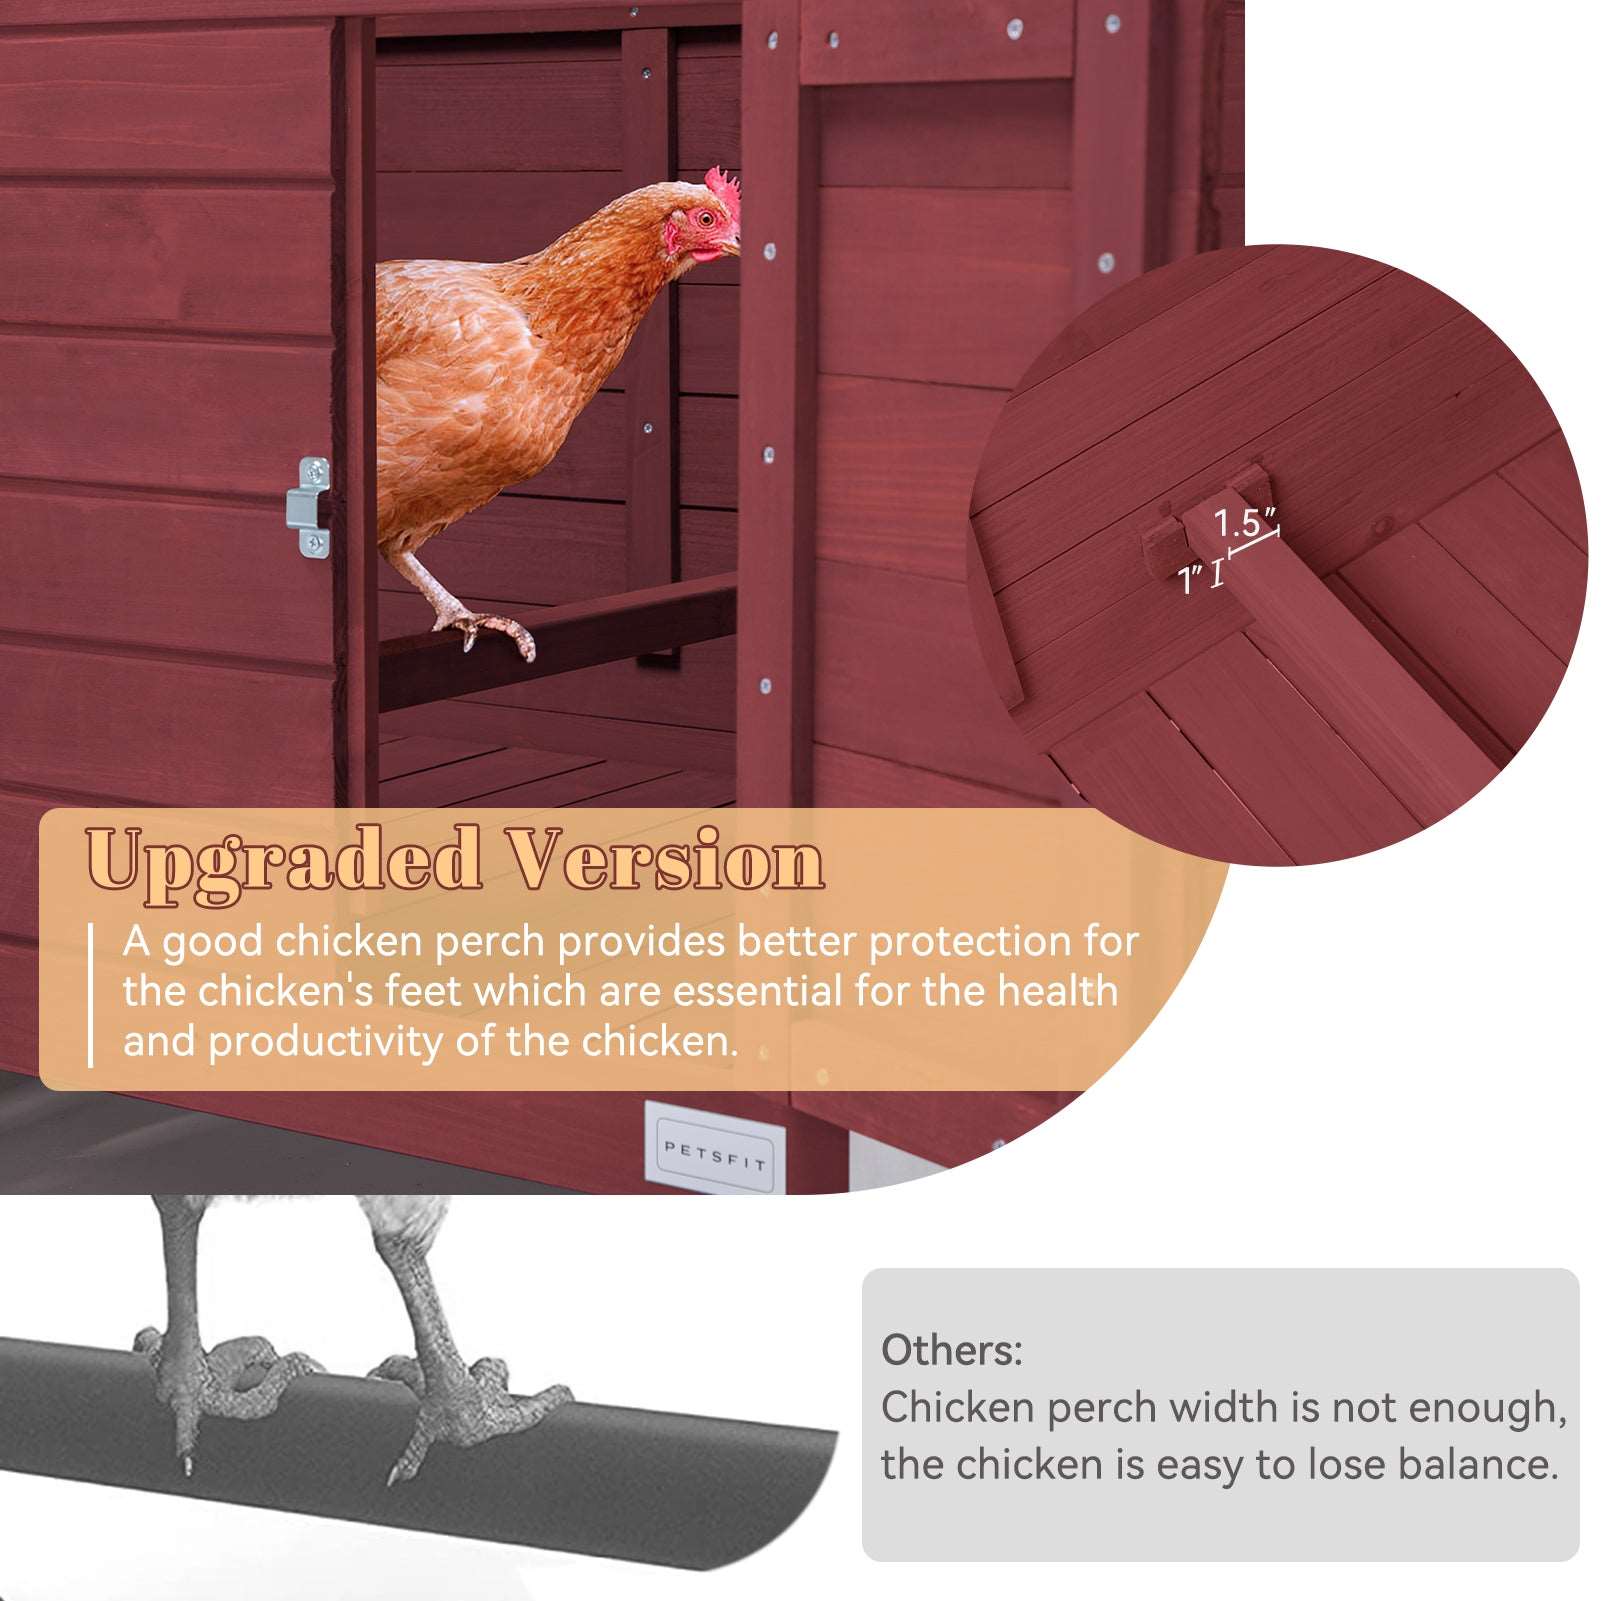 petsfit-large-chicken-coop-with-upgraded-perches-wooden-outdoor-chicken-cage-with-large-nesting-box-weatherproof-open-asphalt-roof-and-removable-bottom-for-easy-cleaning-06